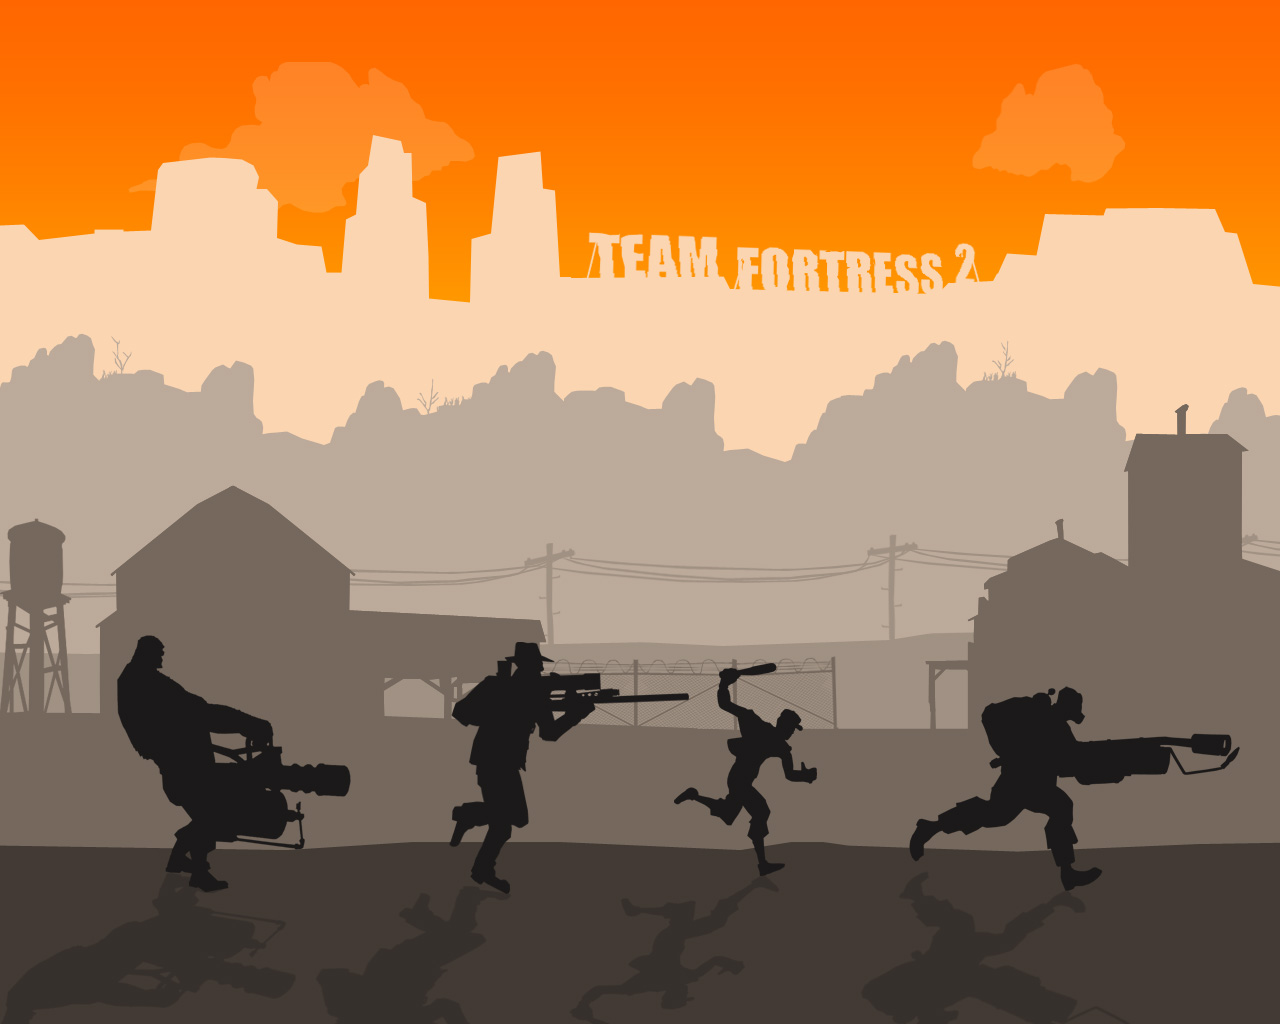 307 Team Fortress 2 HD Wallpapers | Backgrounds - Wallpaper Abyss